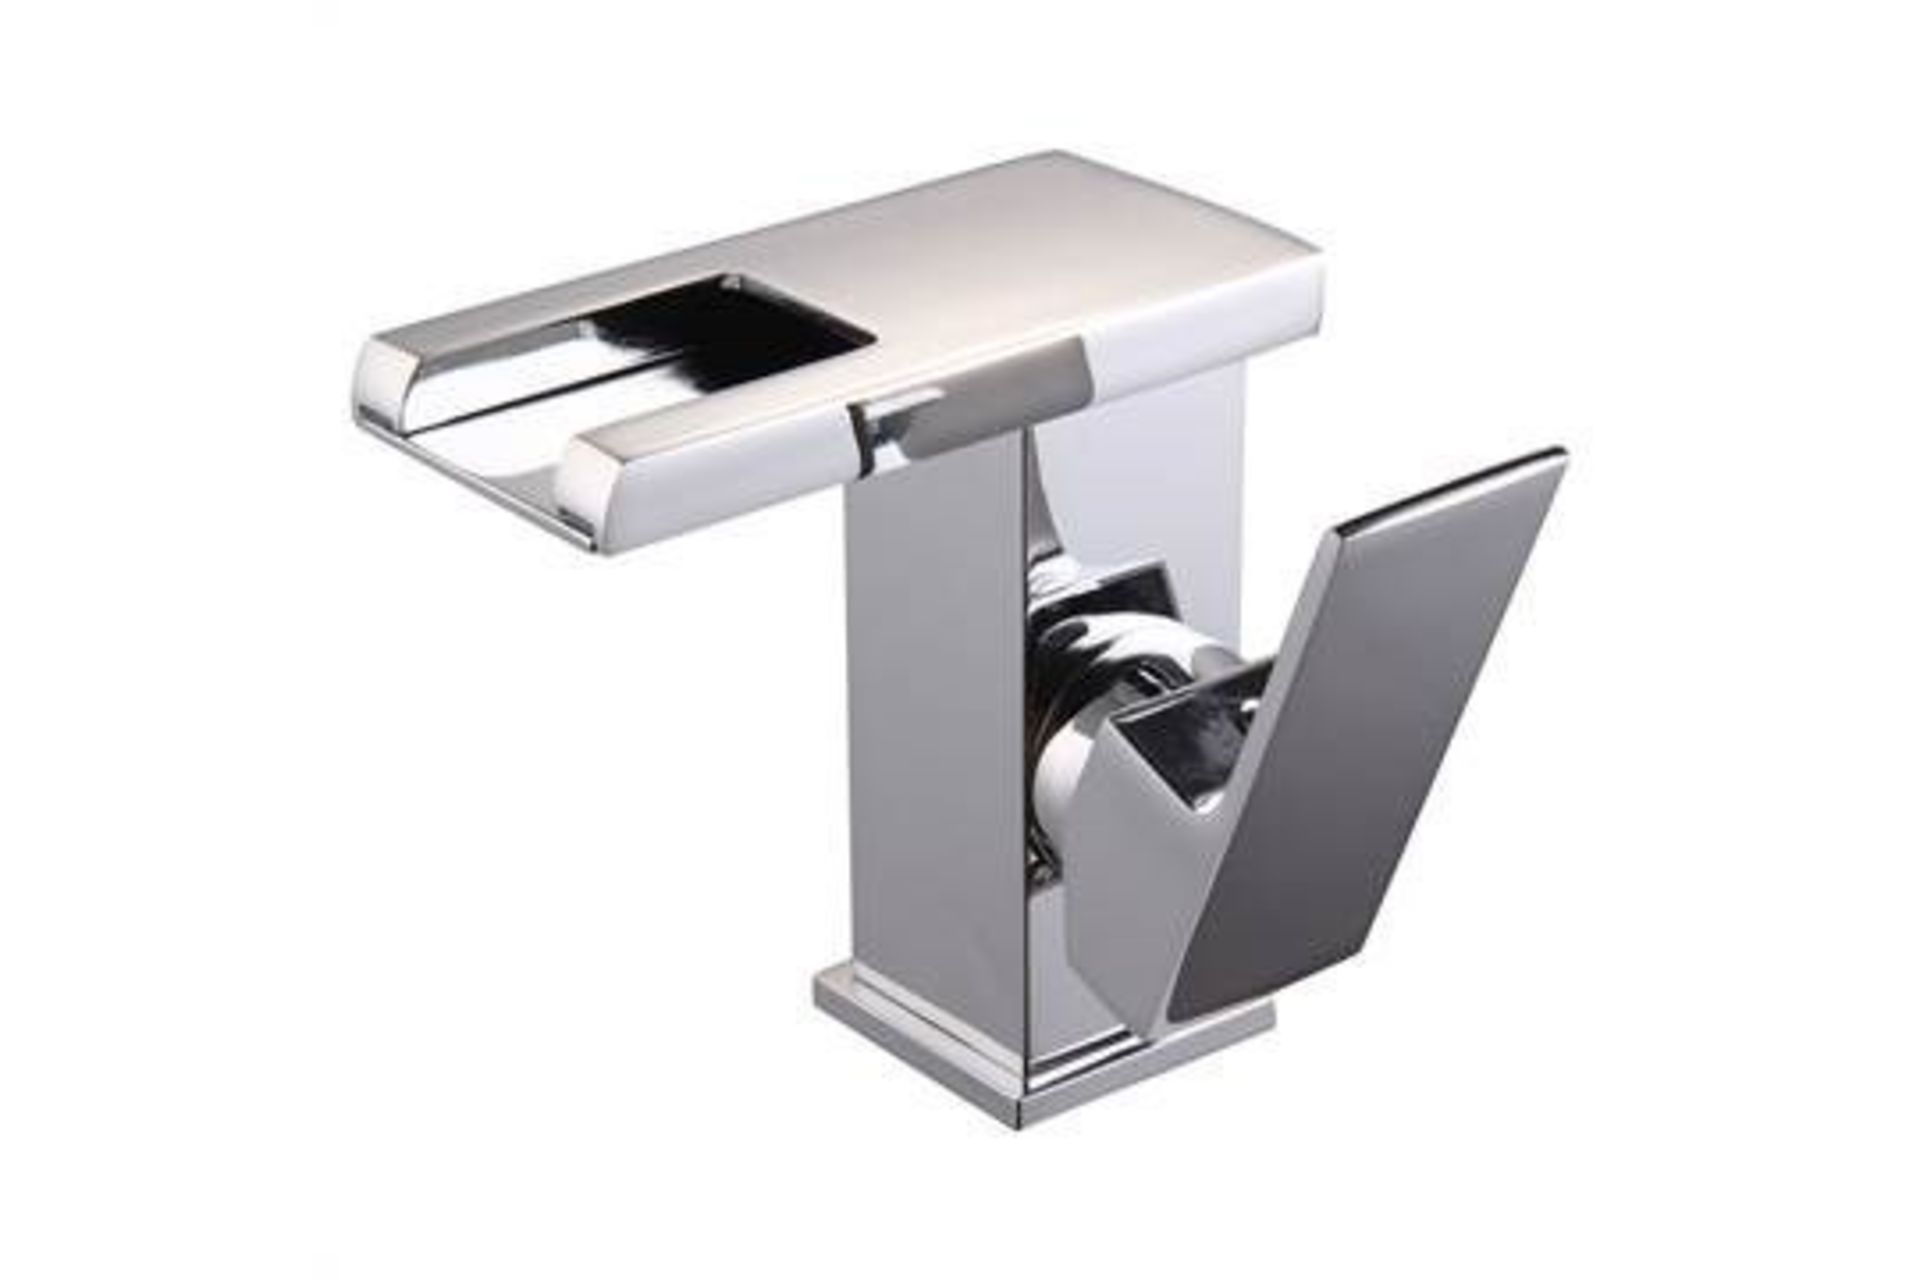 (CT284) LED Waterfall Bathroom Basin Mixer Tap. RRP £229.99. Easy to install and clean. All copper - Image 3 of 3